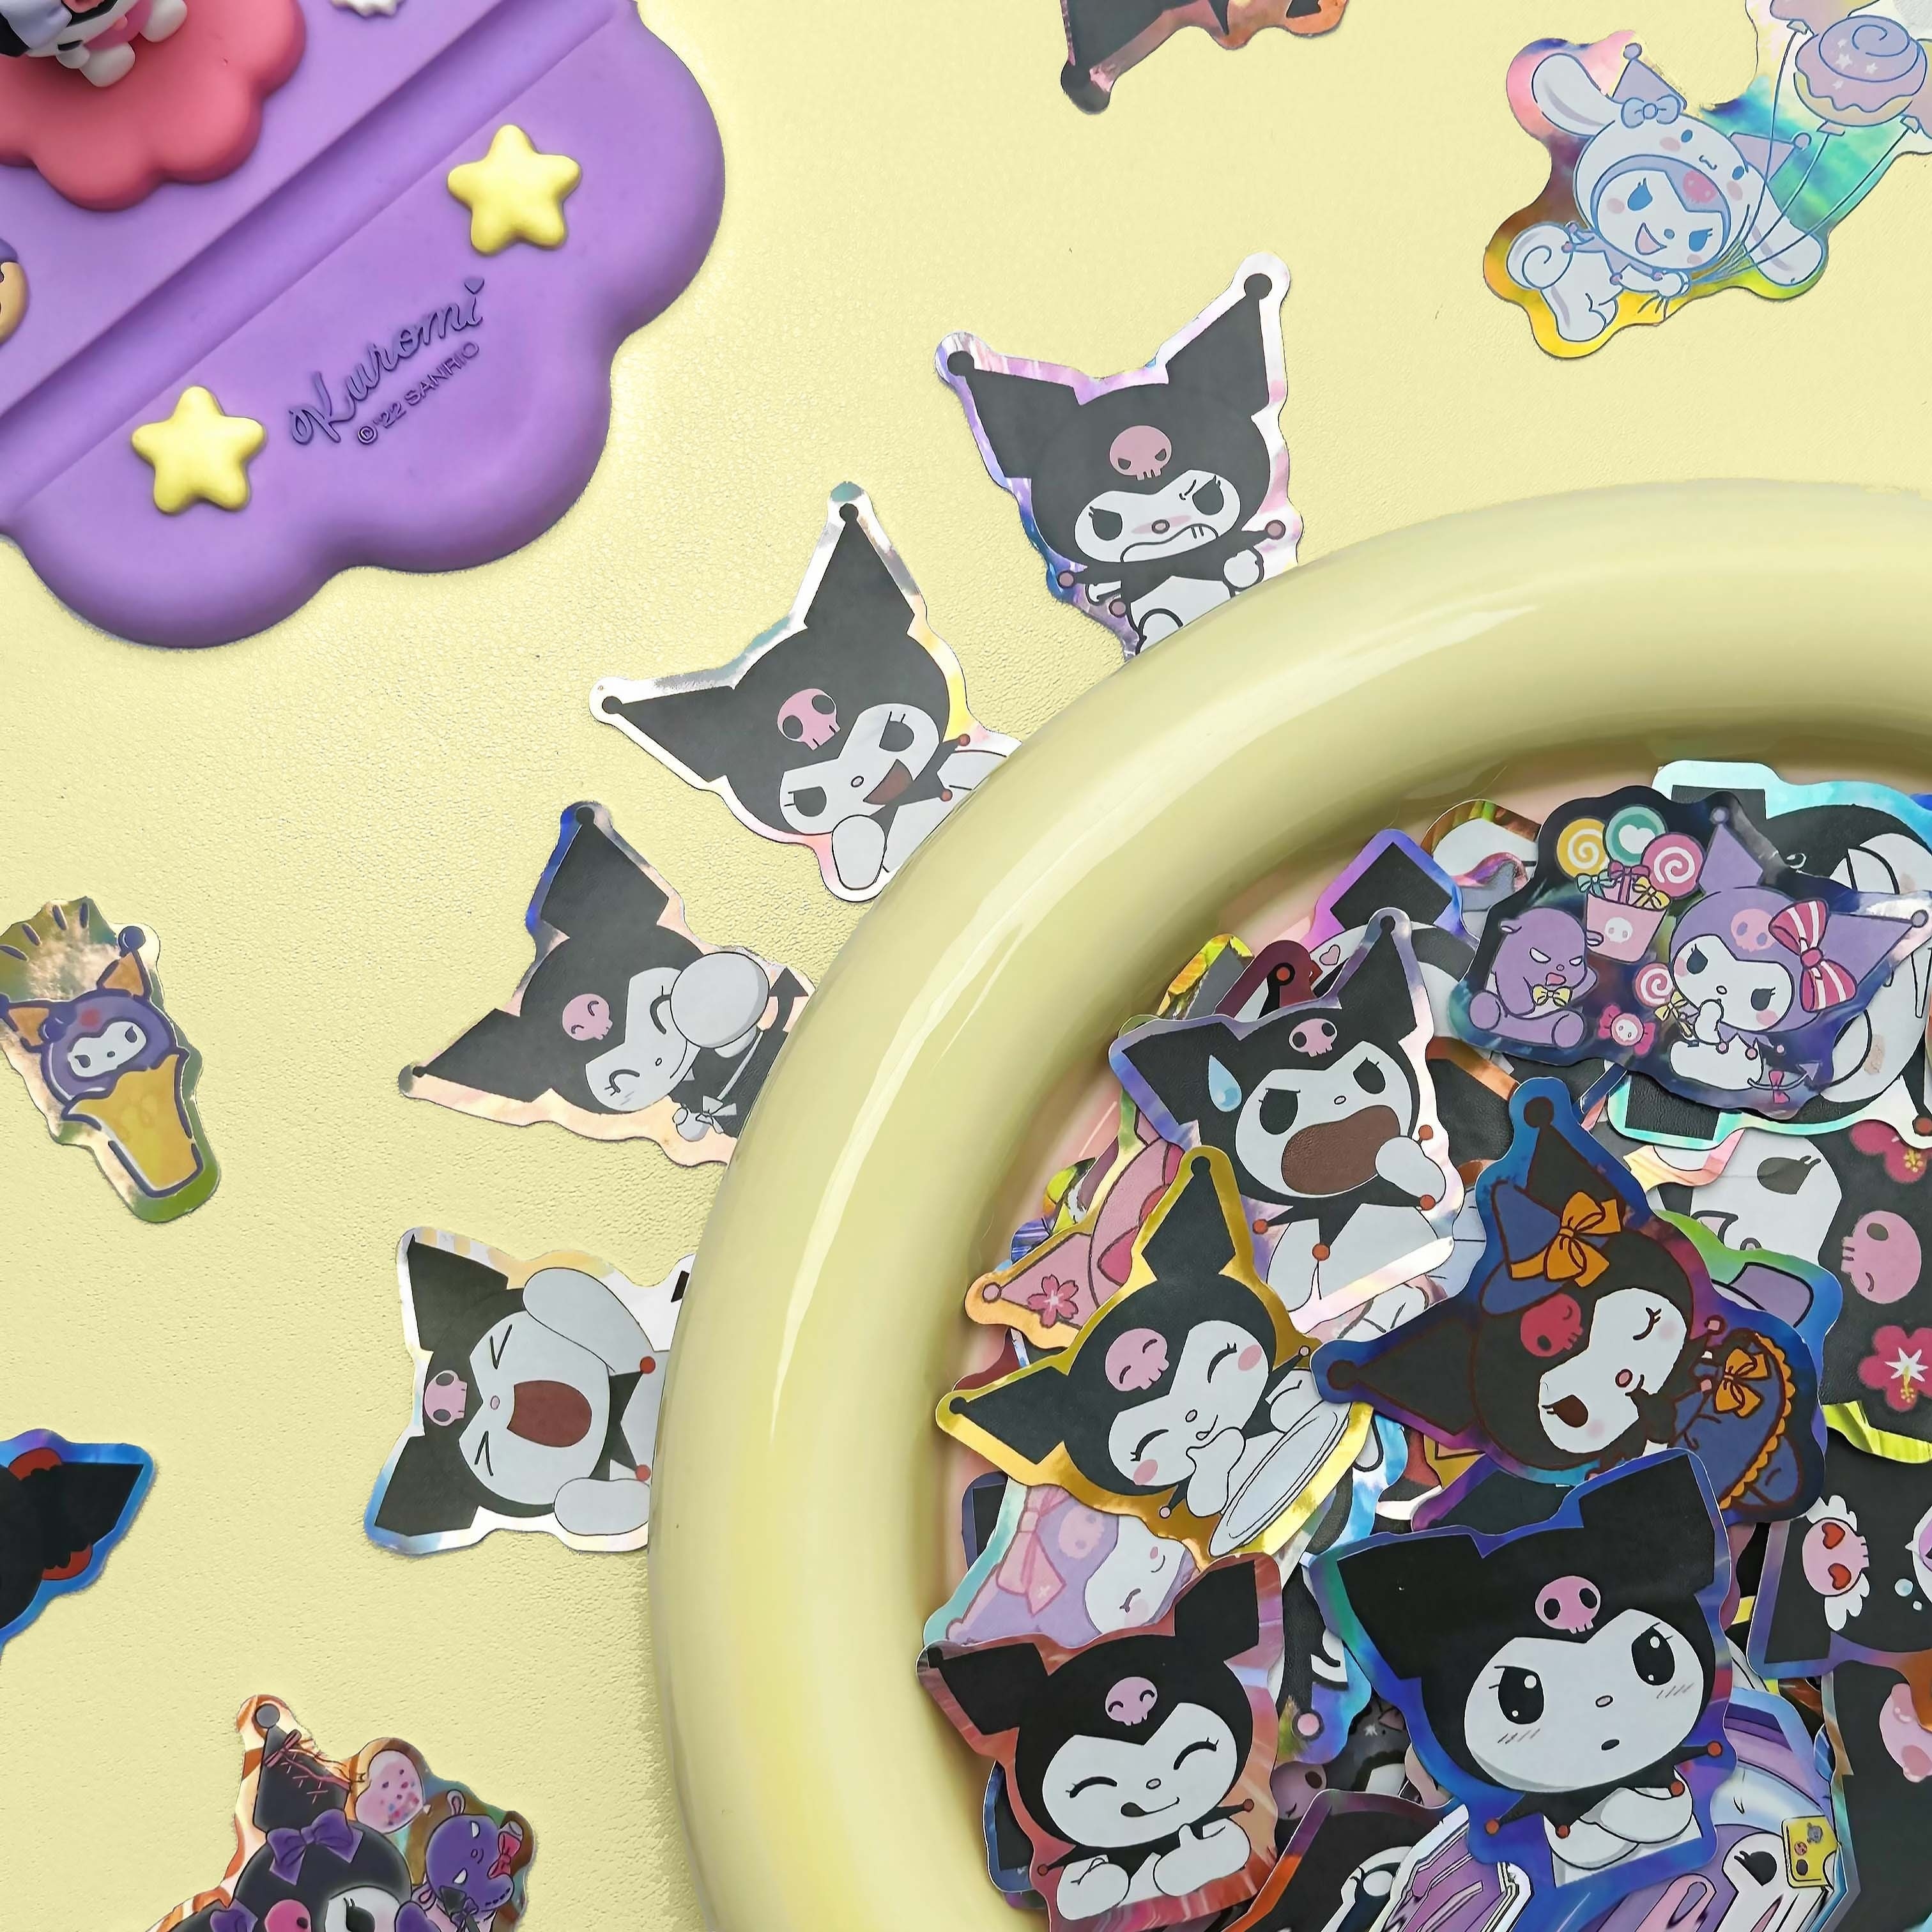 74pcs Kuromi Party Favors Include 10 Cute Shoe Charms, 14 Kawaii Button Pins, 50 Anime Cute Stickers for Kids Girls Party Supplies Gift Goodie Bag